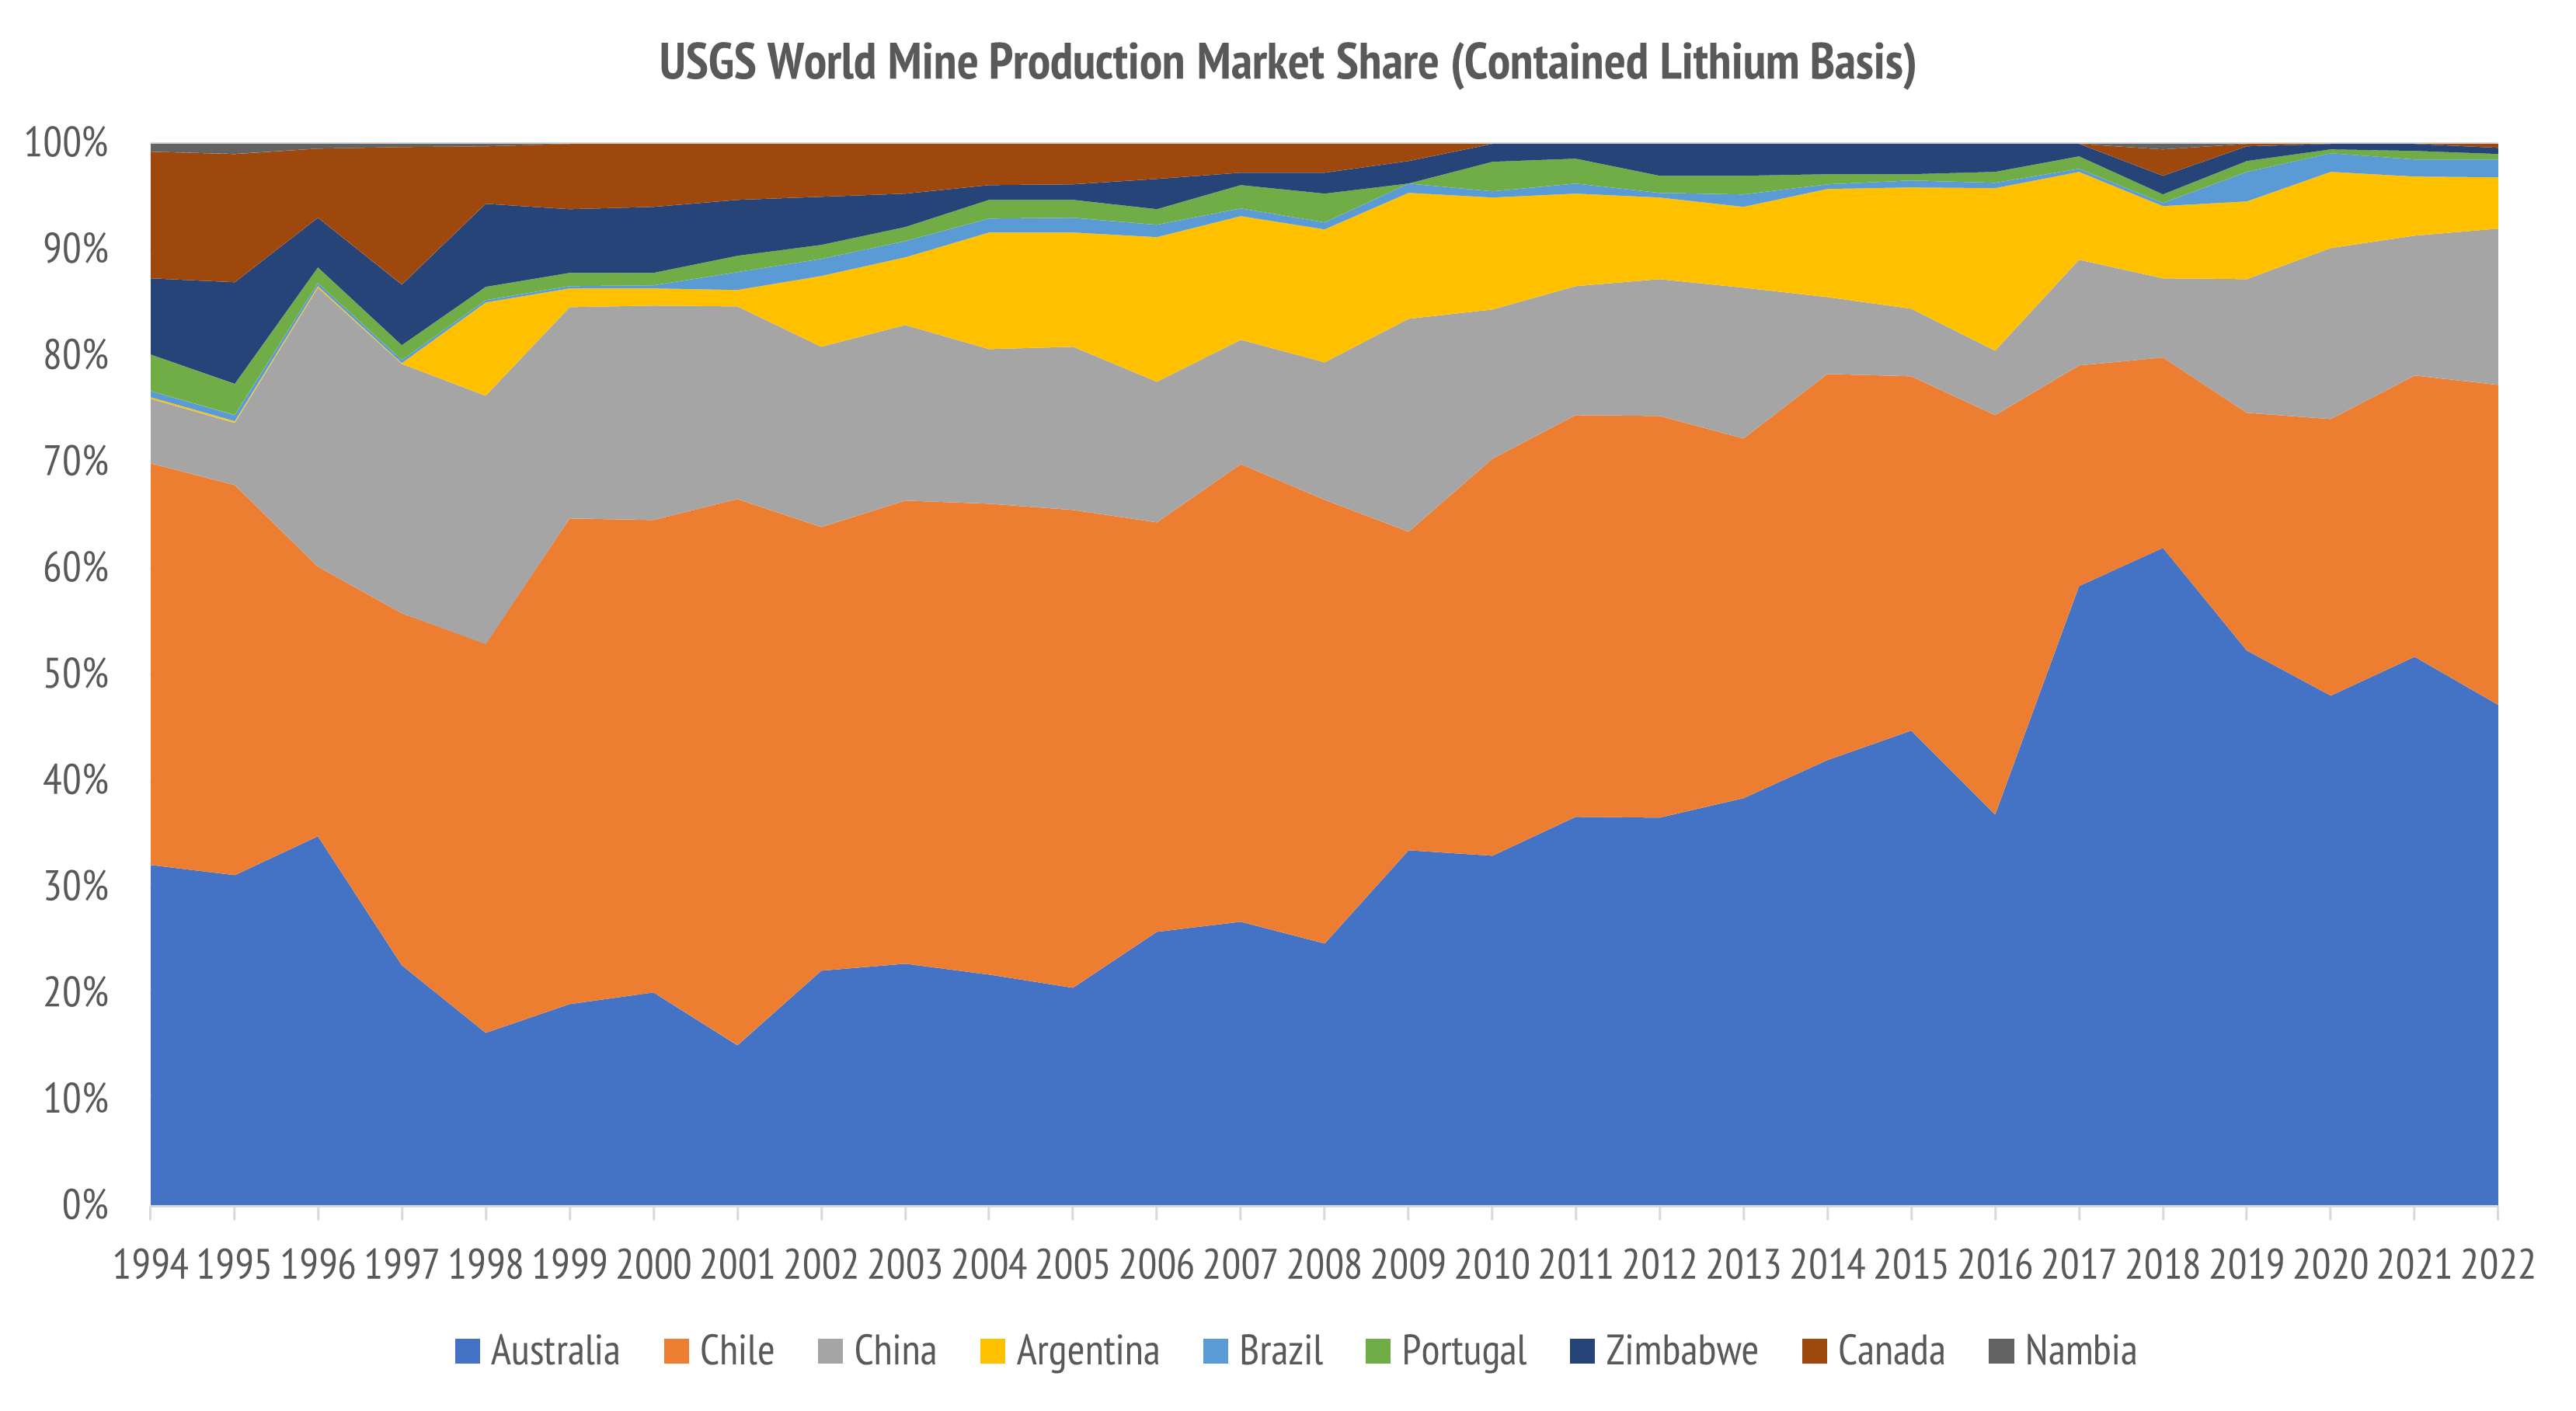 Production share for contained lithium. Source: USGS Mineral Commodity Summaries (1996-2023).